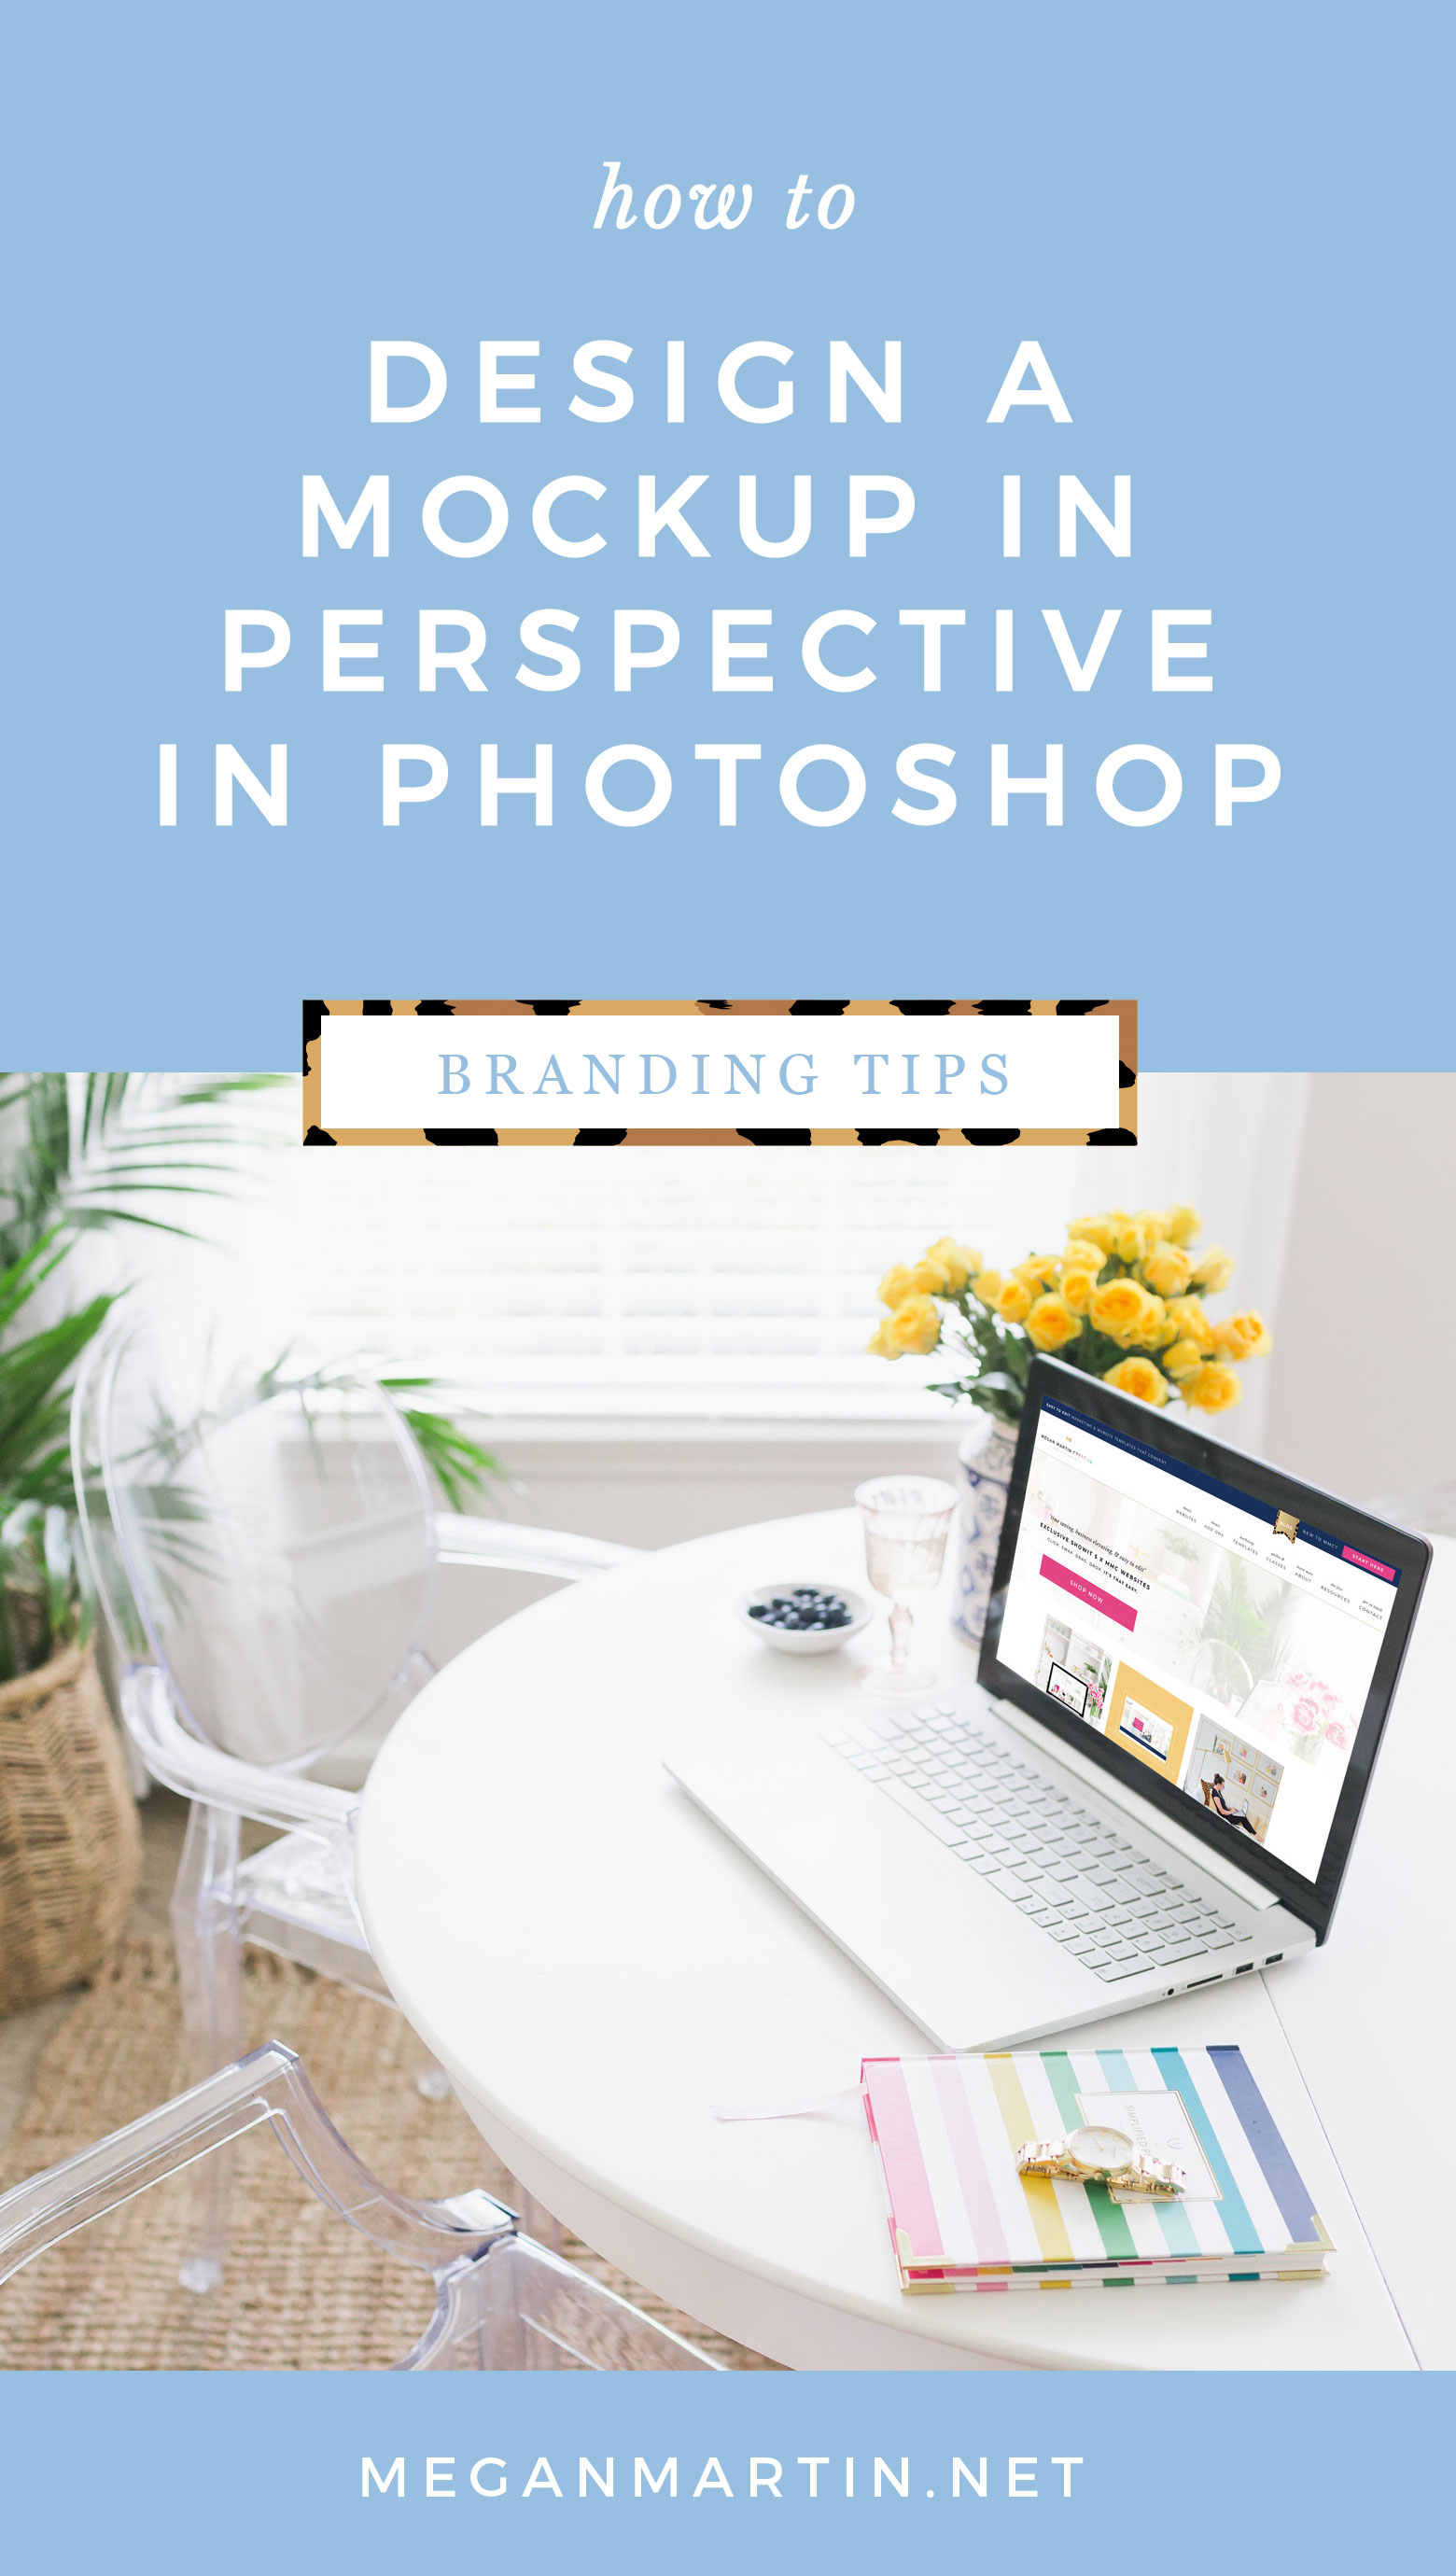 learn how to design a mockup in perspective in photoshop, sc stockshop, social media marketing, blog graphics, pin graphics, branding, computer stock photography